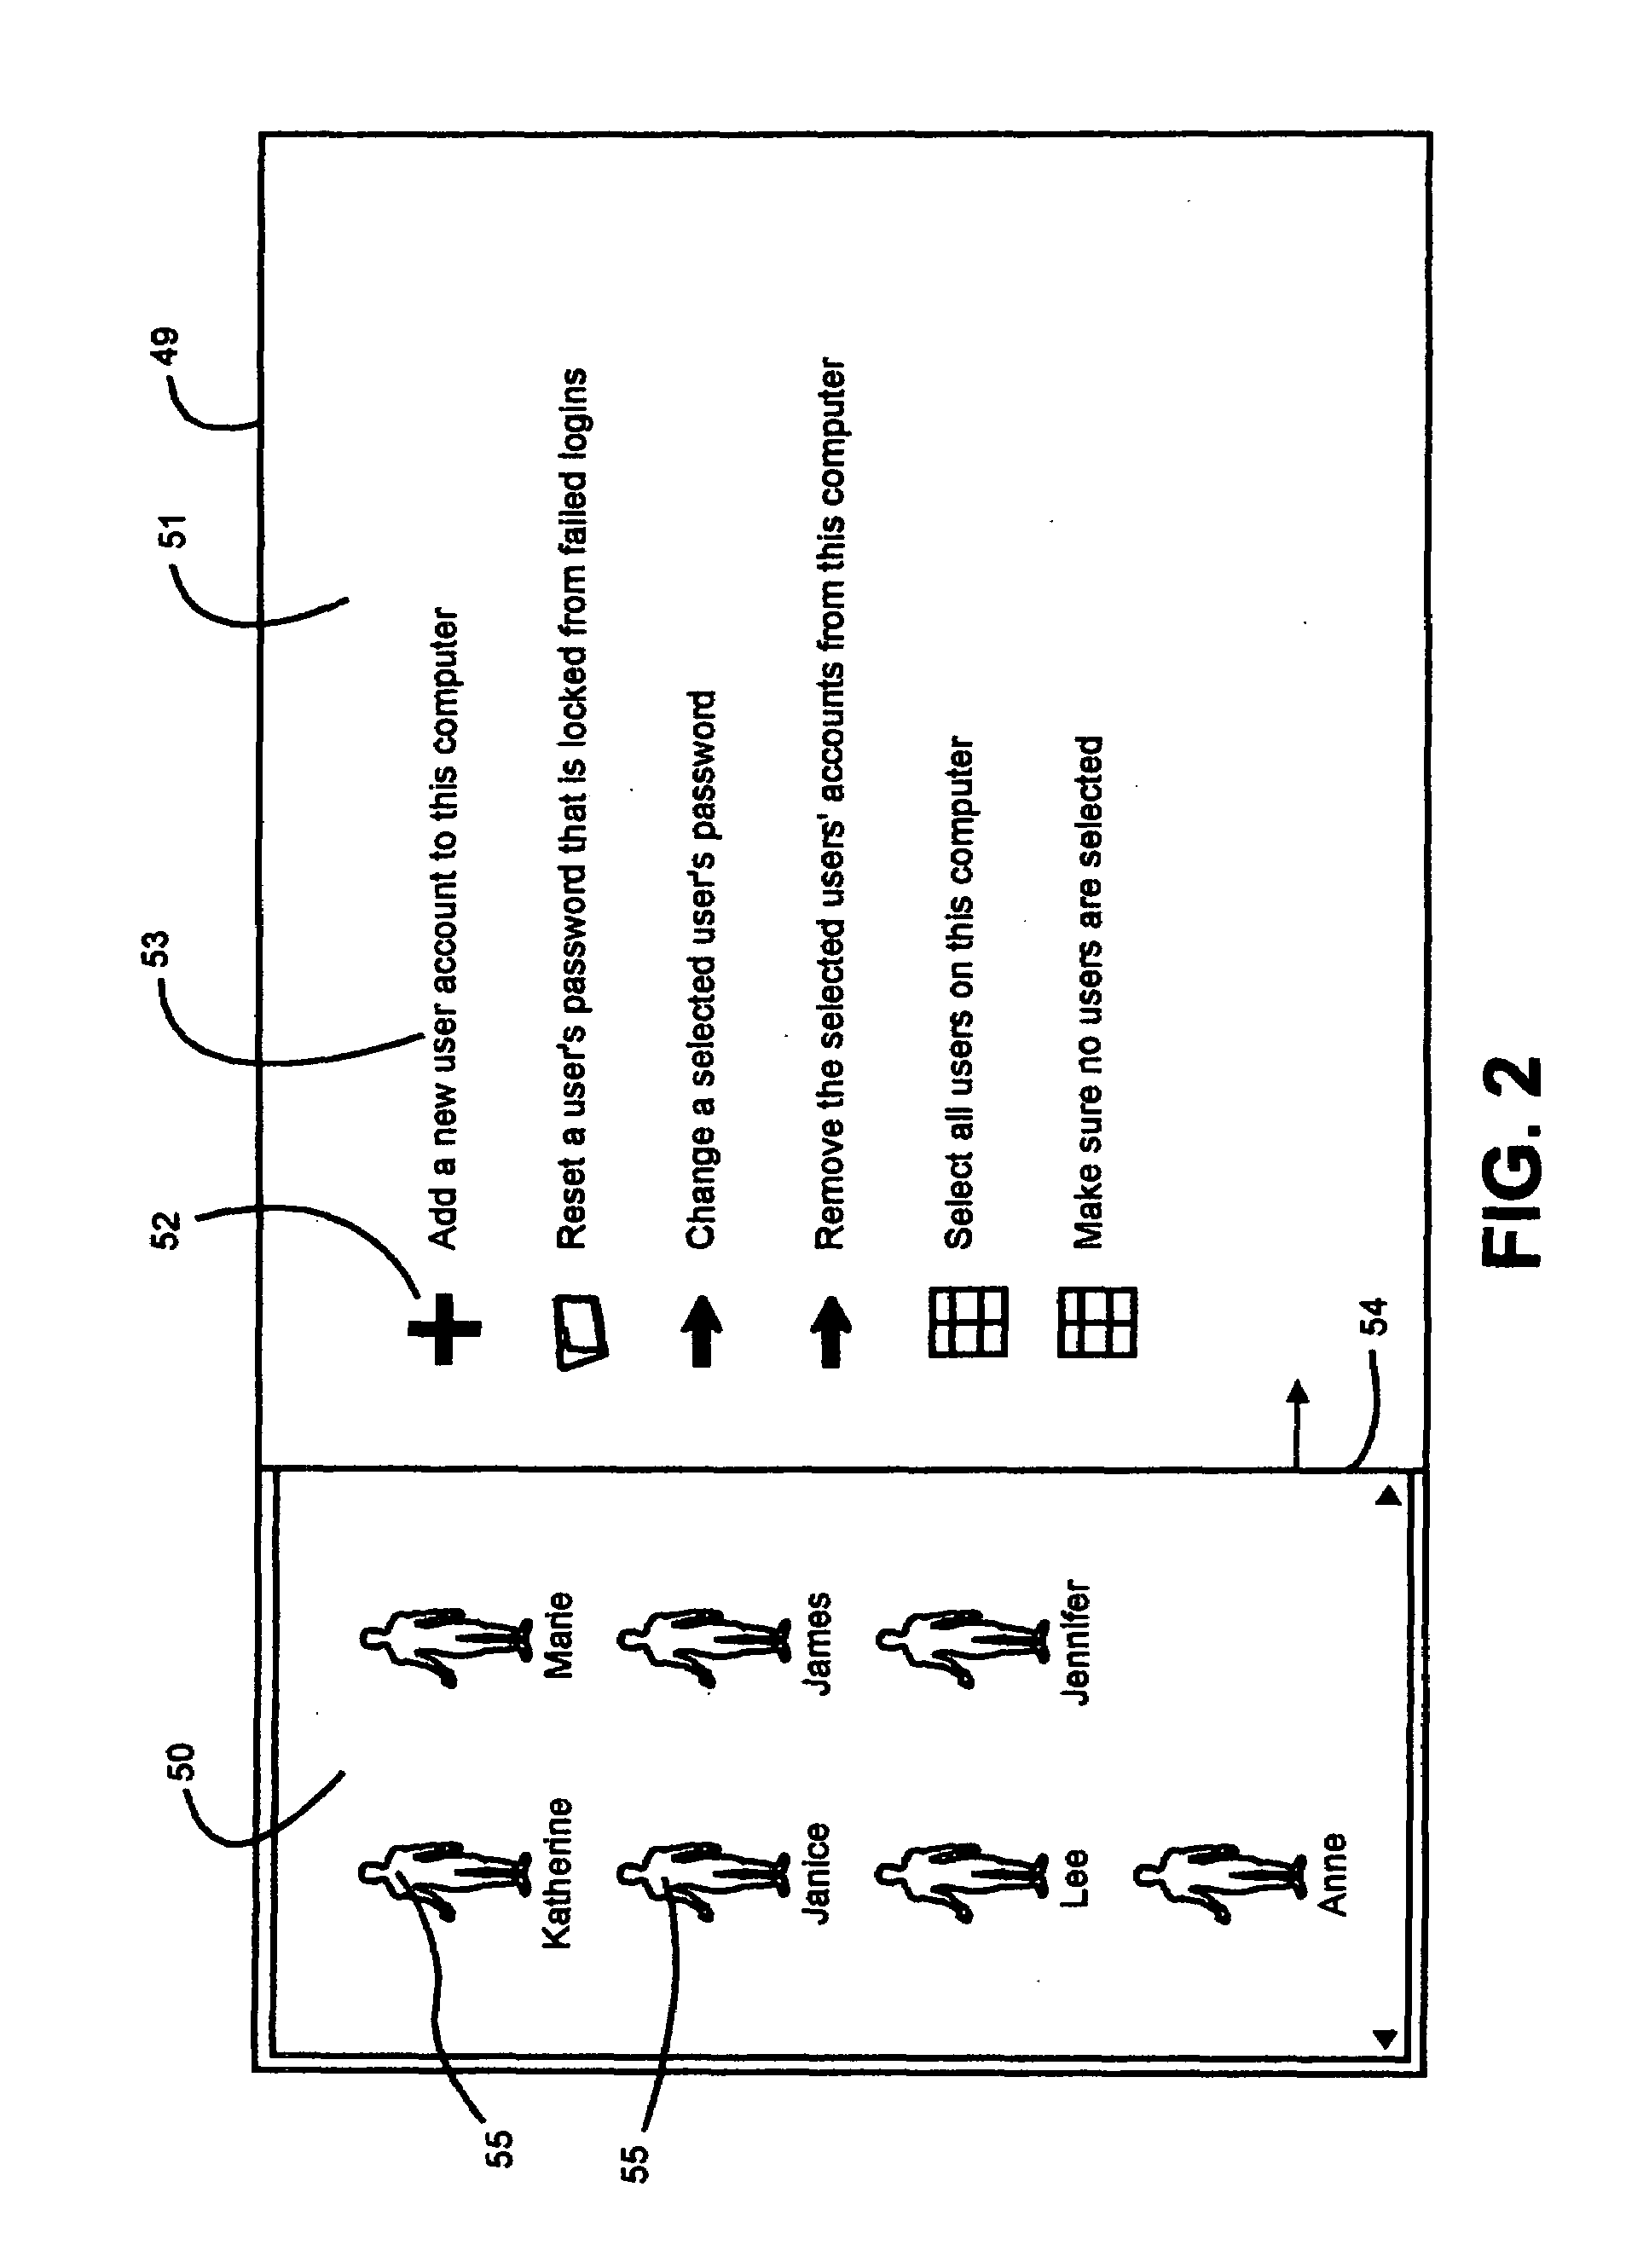 Display interface to a computer controlled display system with variable comprehensiveness levels of menu items dependent upon size of variable display screen available for menu item display